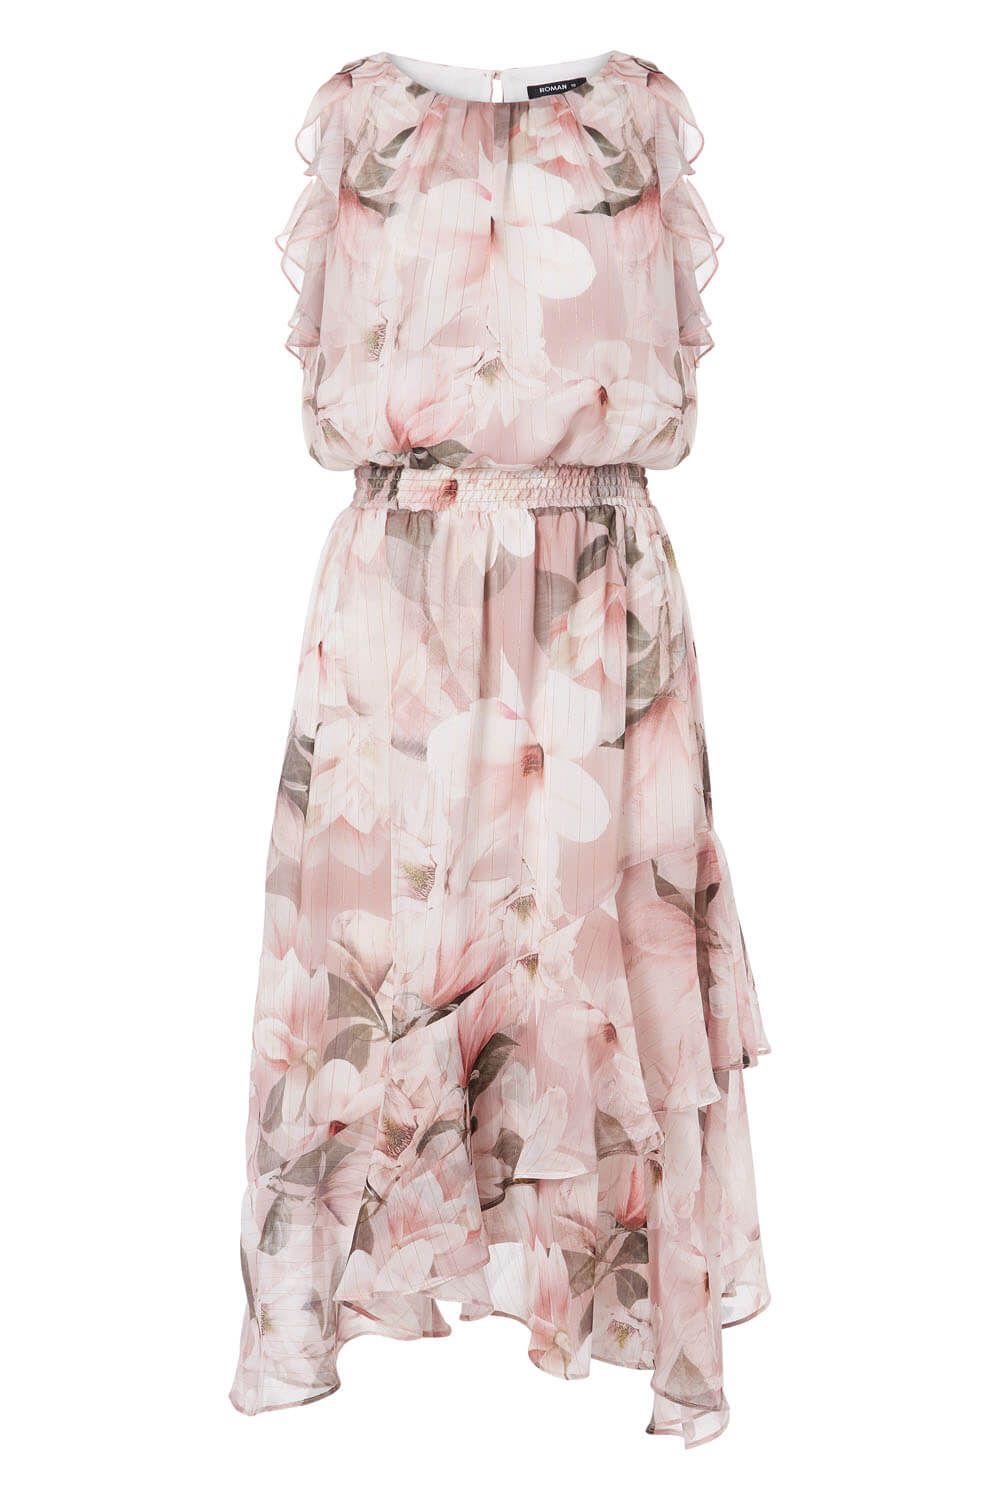 Light Pink Floral Frill Fit and Flare Midi Dress, Image 4 of 4